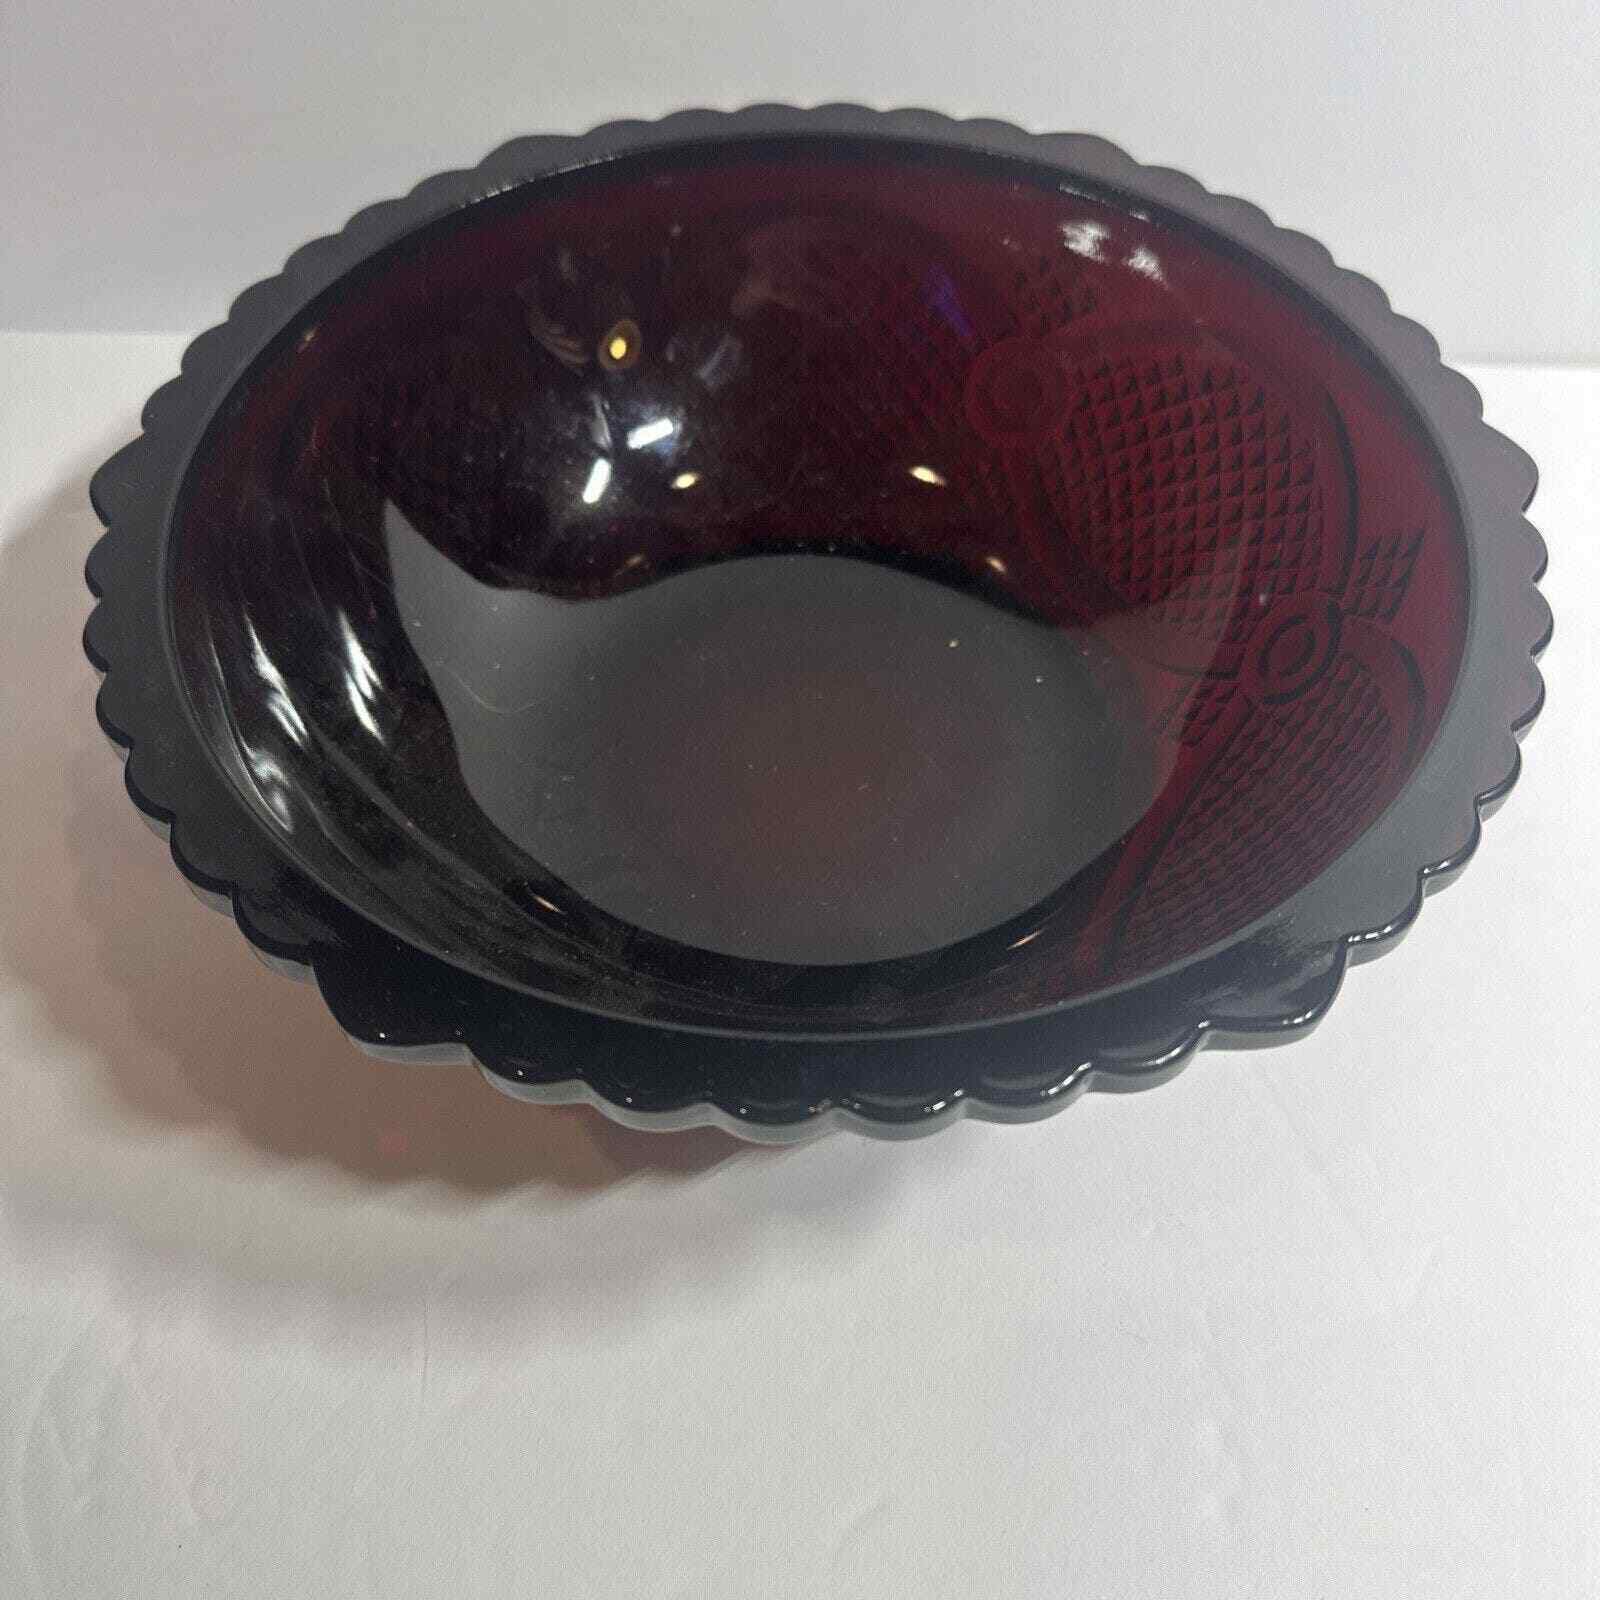 Vintage Avon Red Ruby 1876 Cape Cod Serving Bowl Excellent Gift